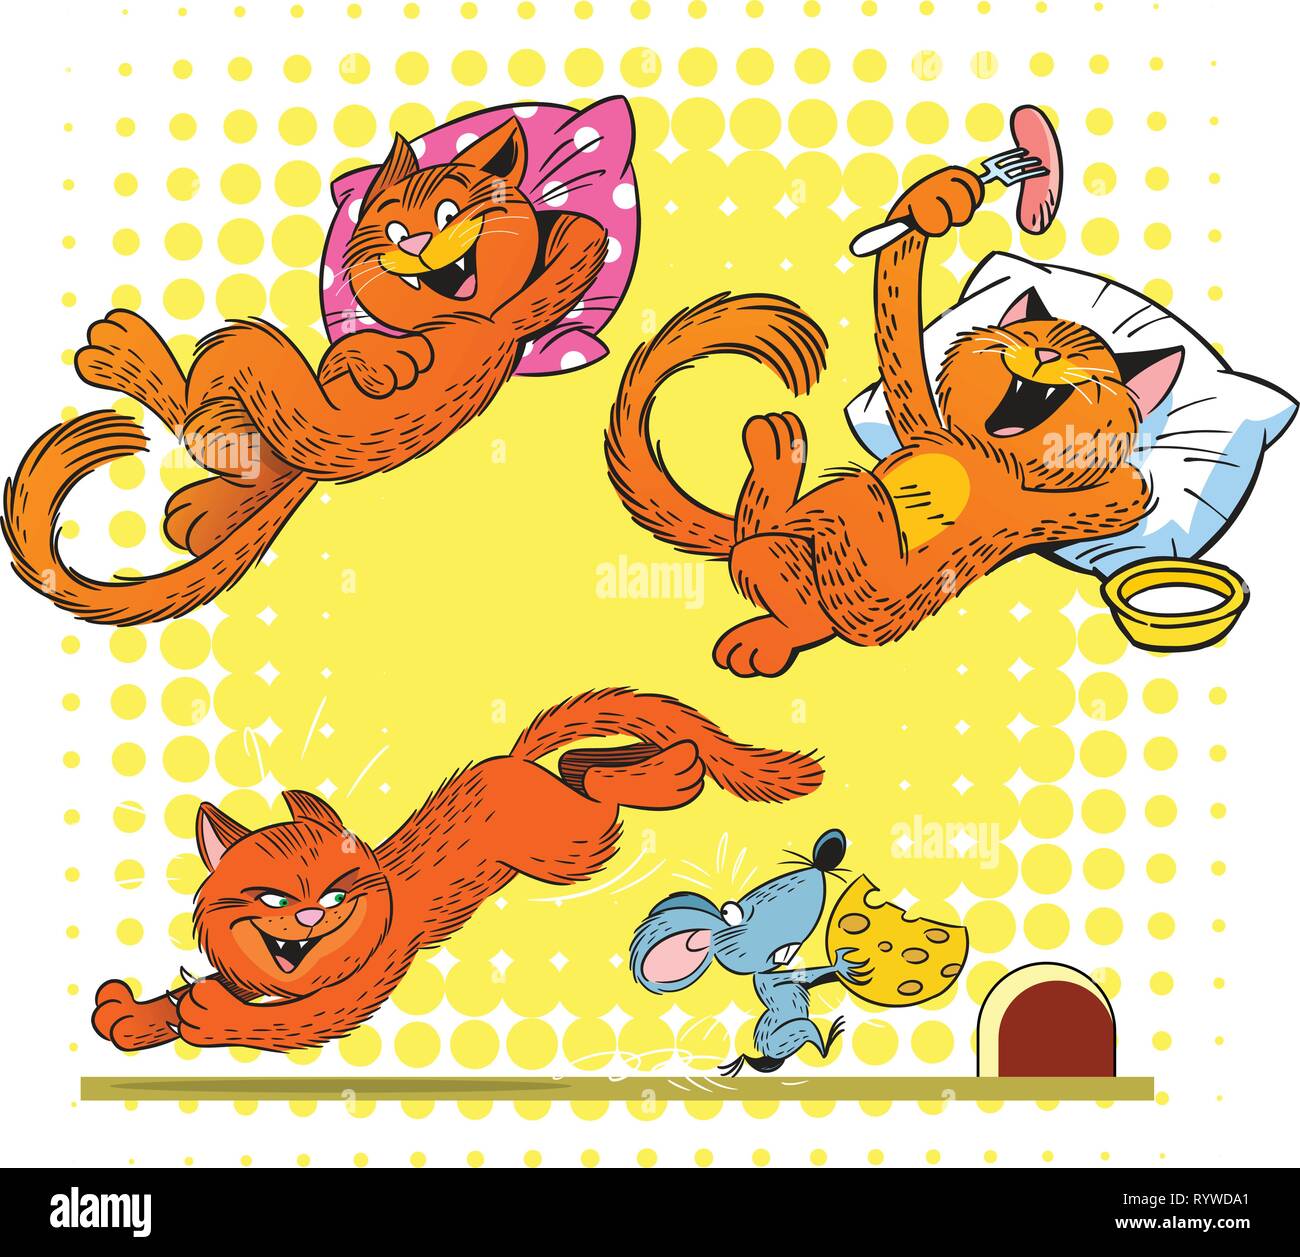 The illustration shows a red cat in various poses and situations. Illustration done on separate layers. Stock Vector